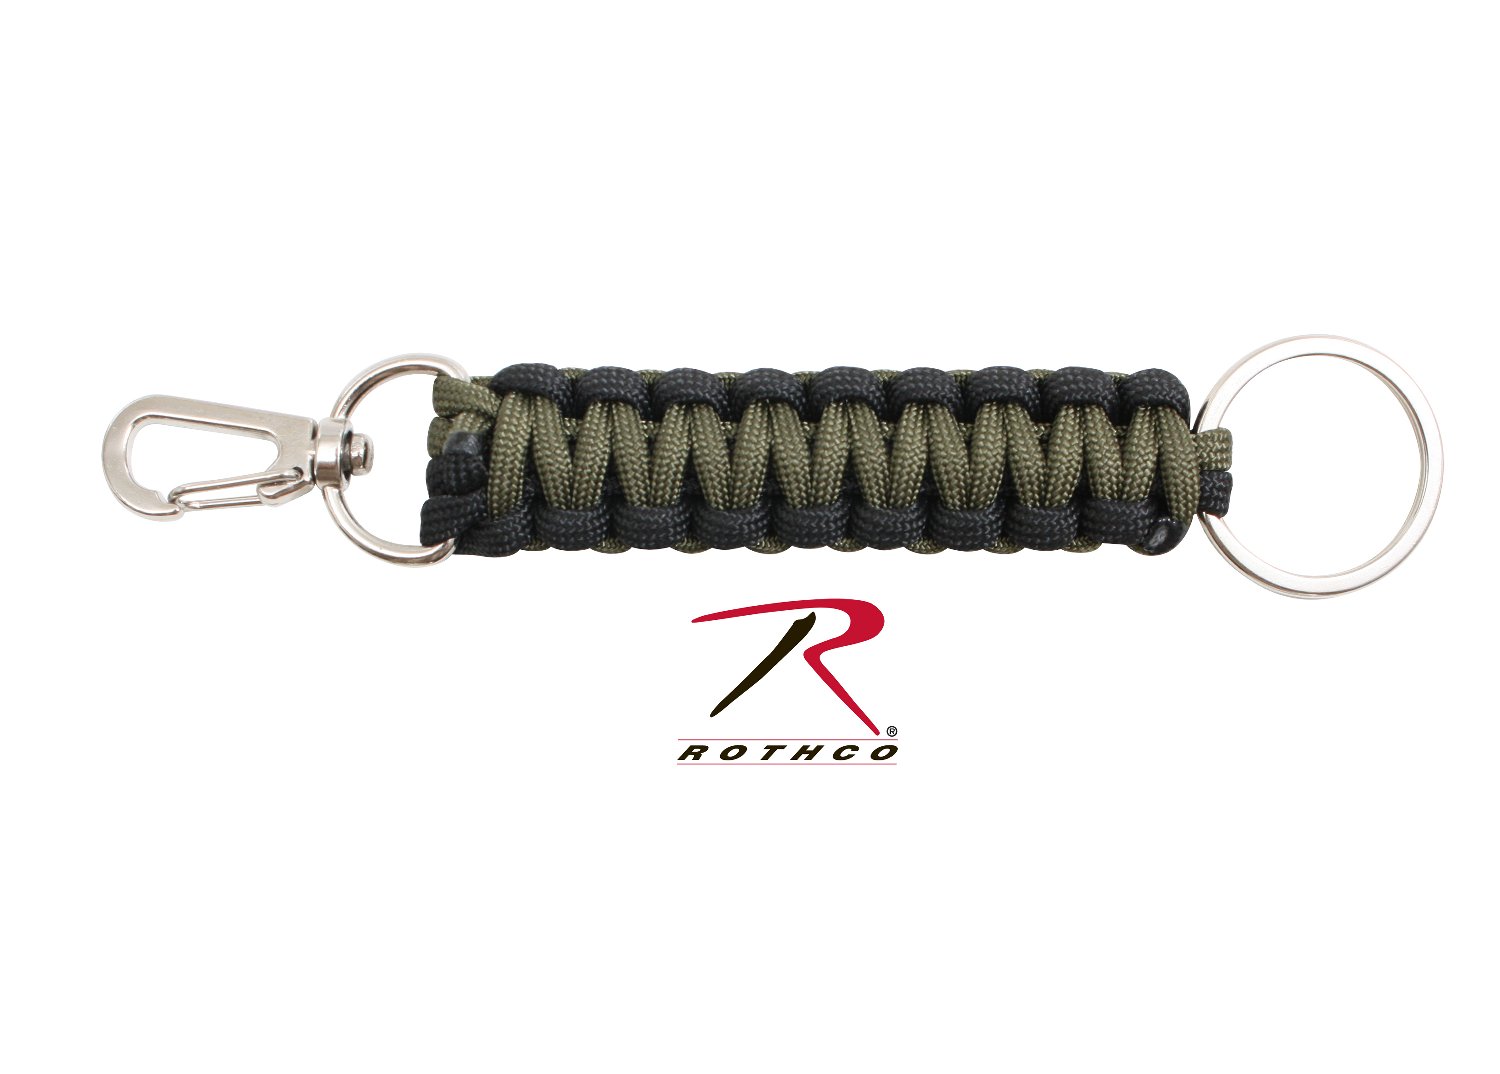 KEY GEAR Paracord Biner survival gear bug out tactical disaster keychain gift